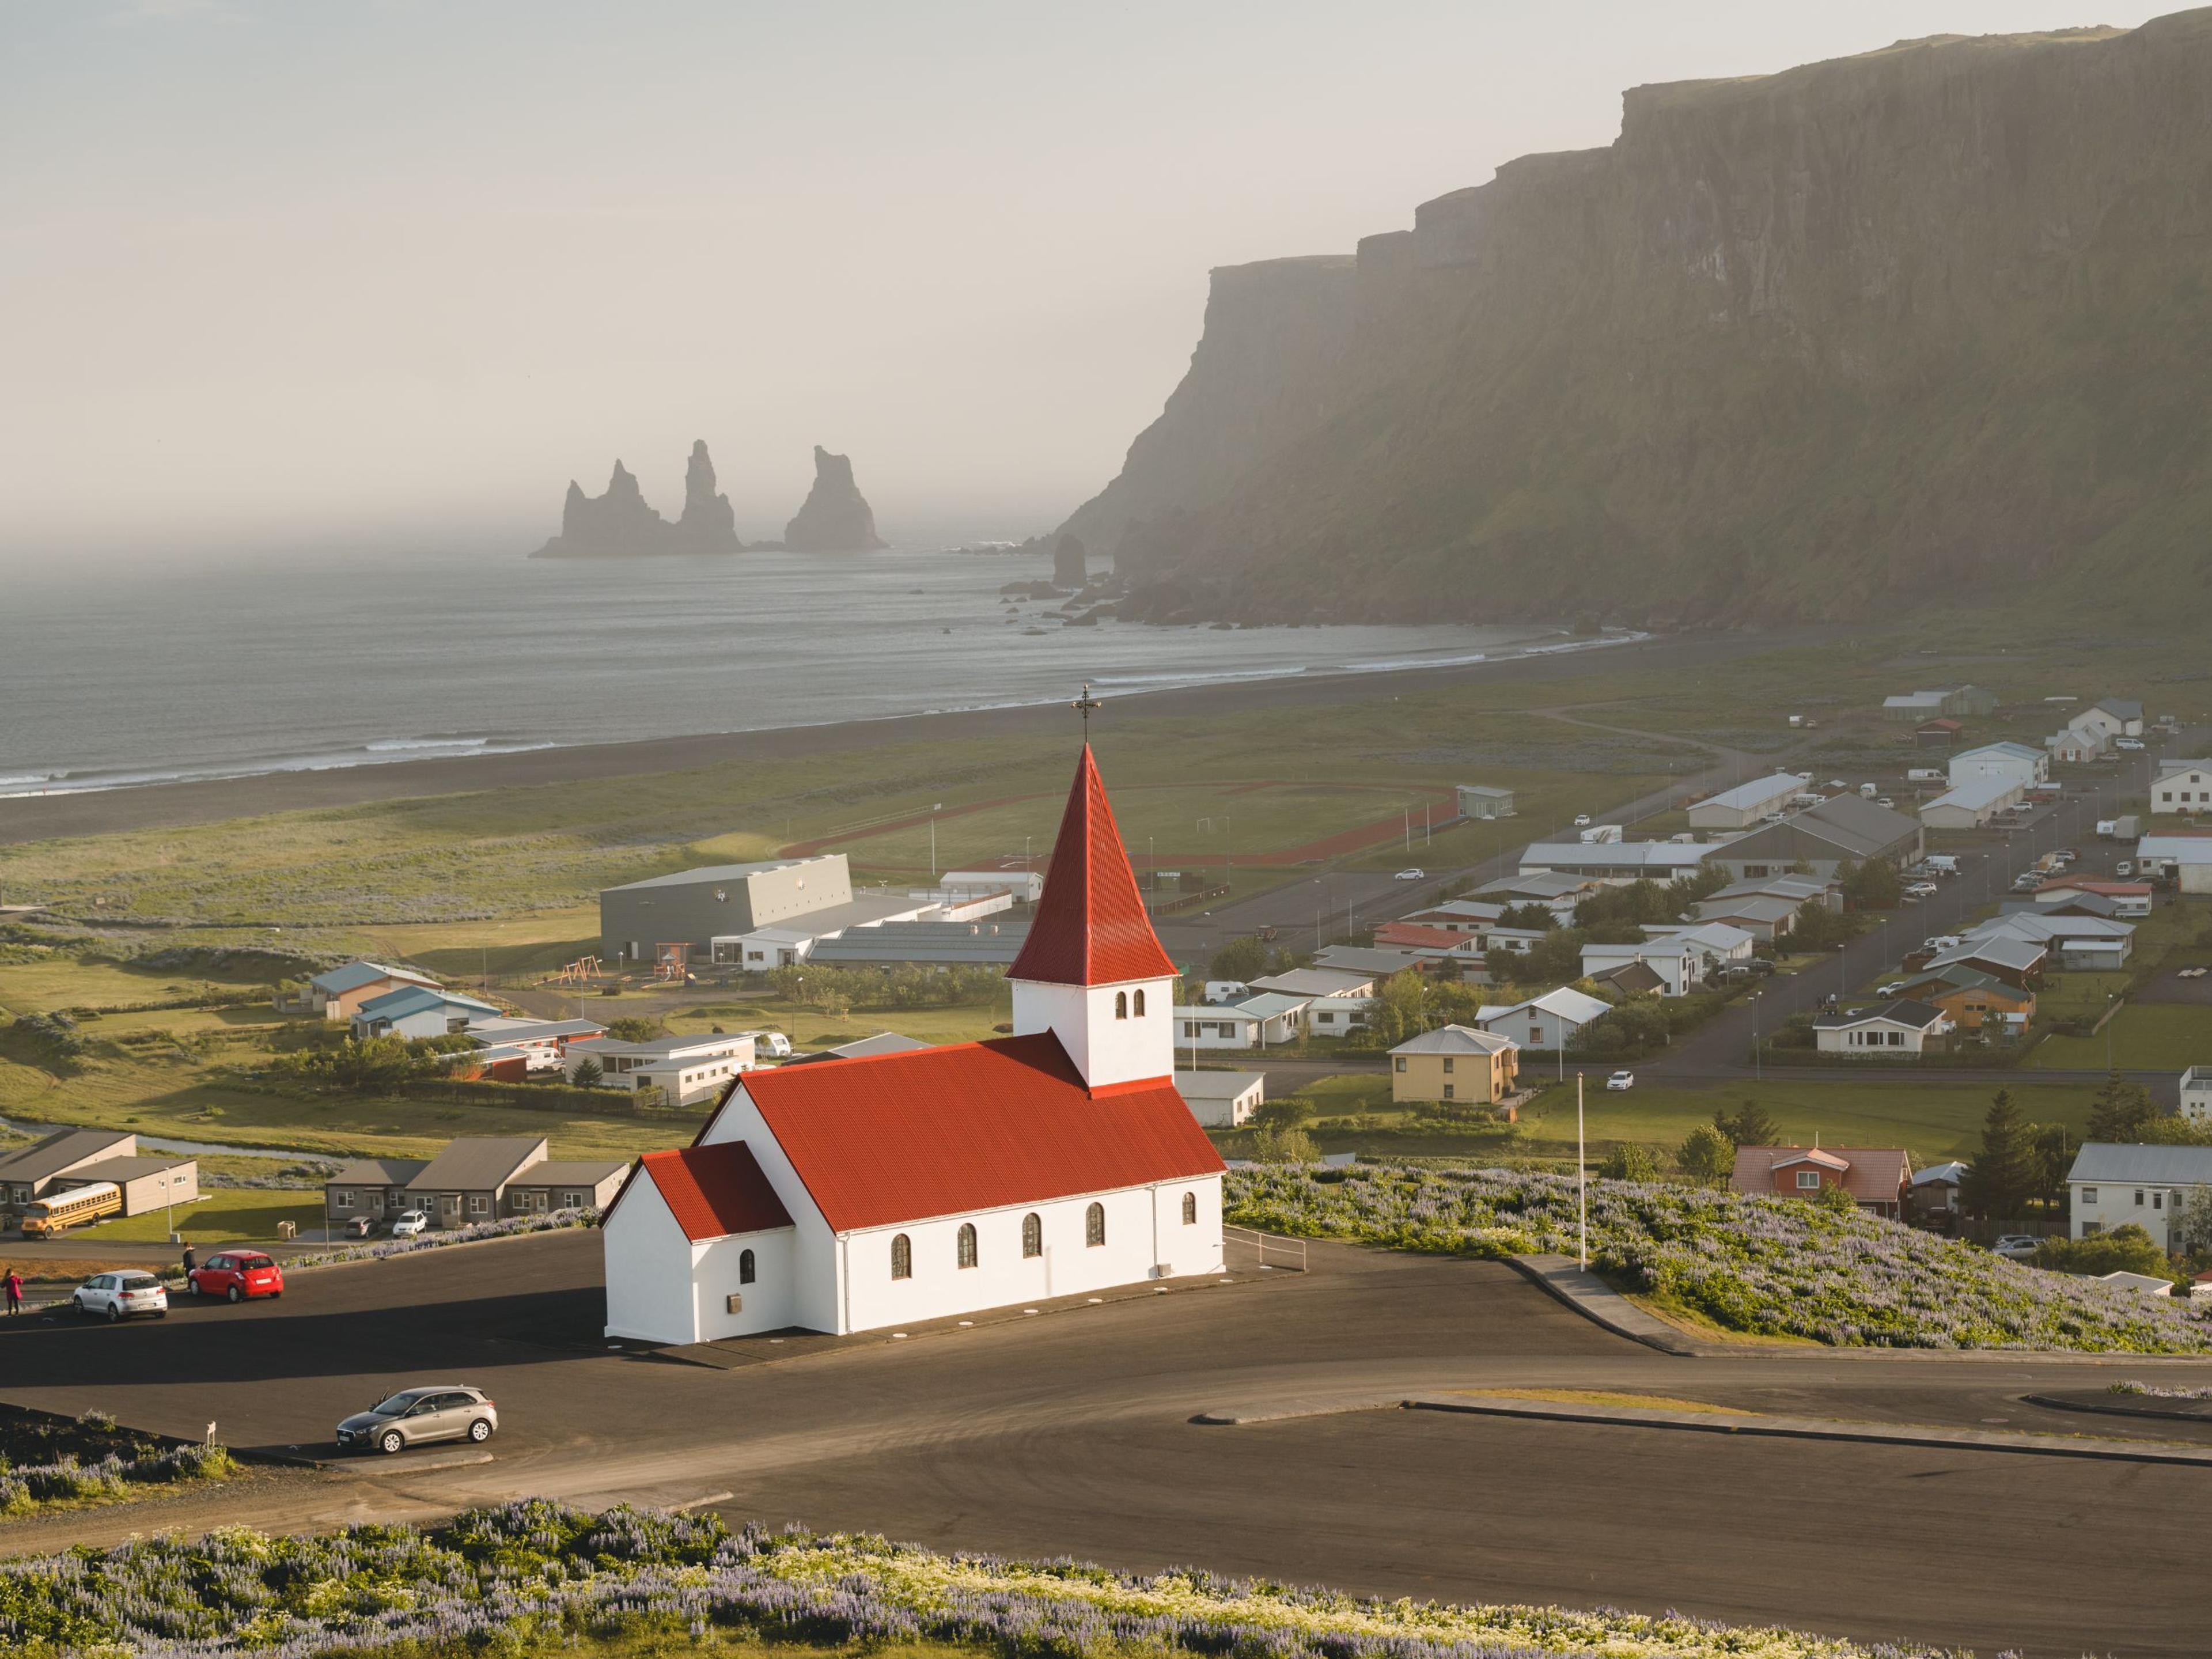 The quaint Vík village, characterized by its iconic red-roofed church standing prominently in the center, with the majestic Reynisdrangar sea stacks piercing the horizon in the backdrop.